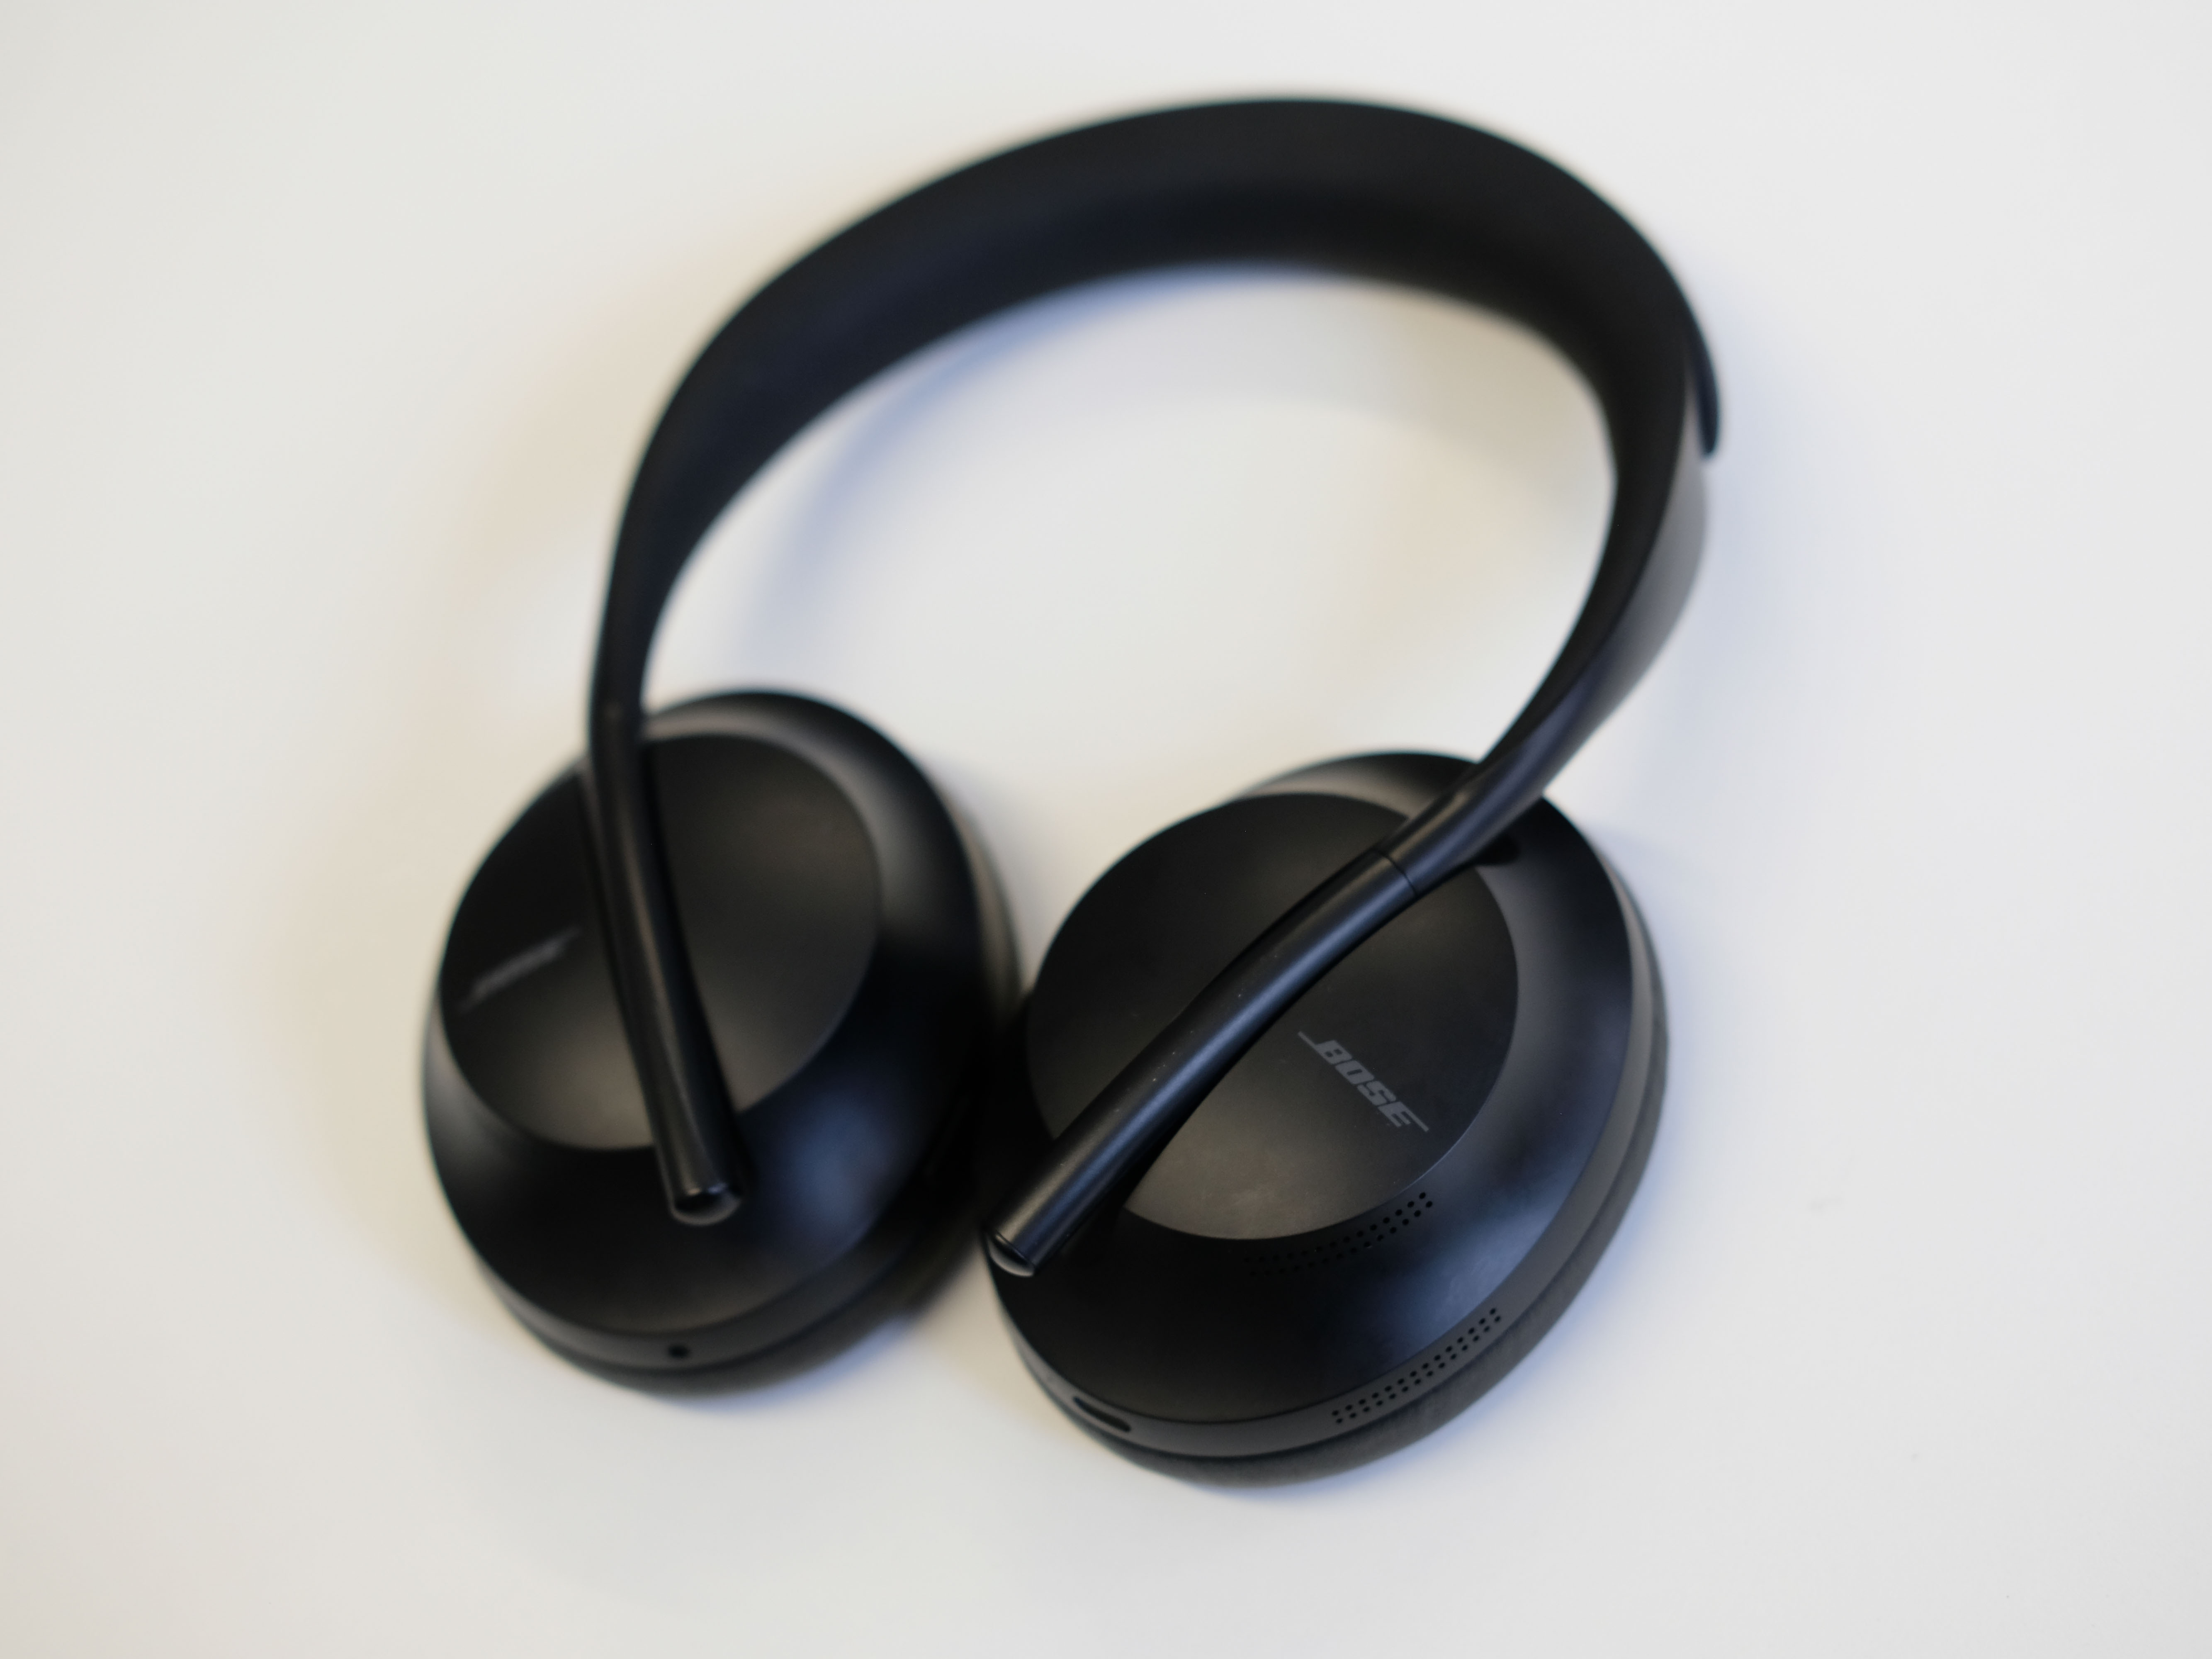 Bose Noise Cancelling Headphones 700 — Here & Away